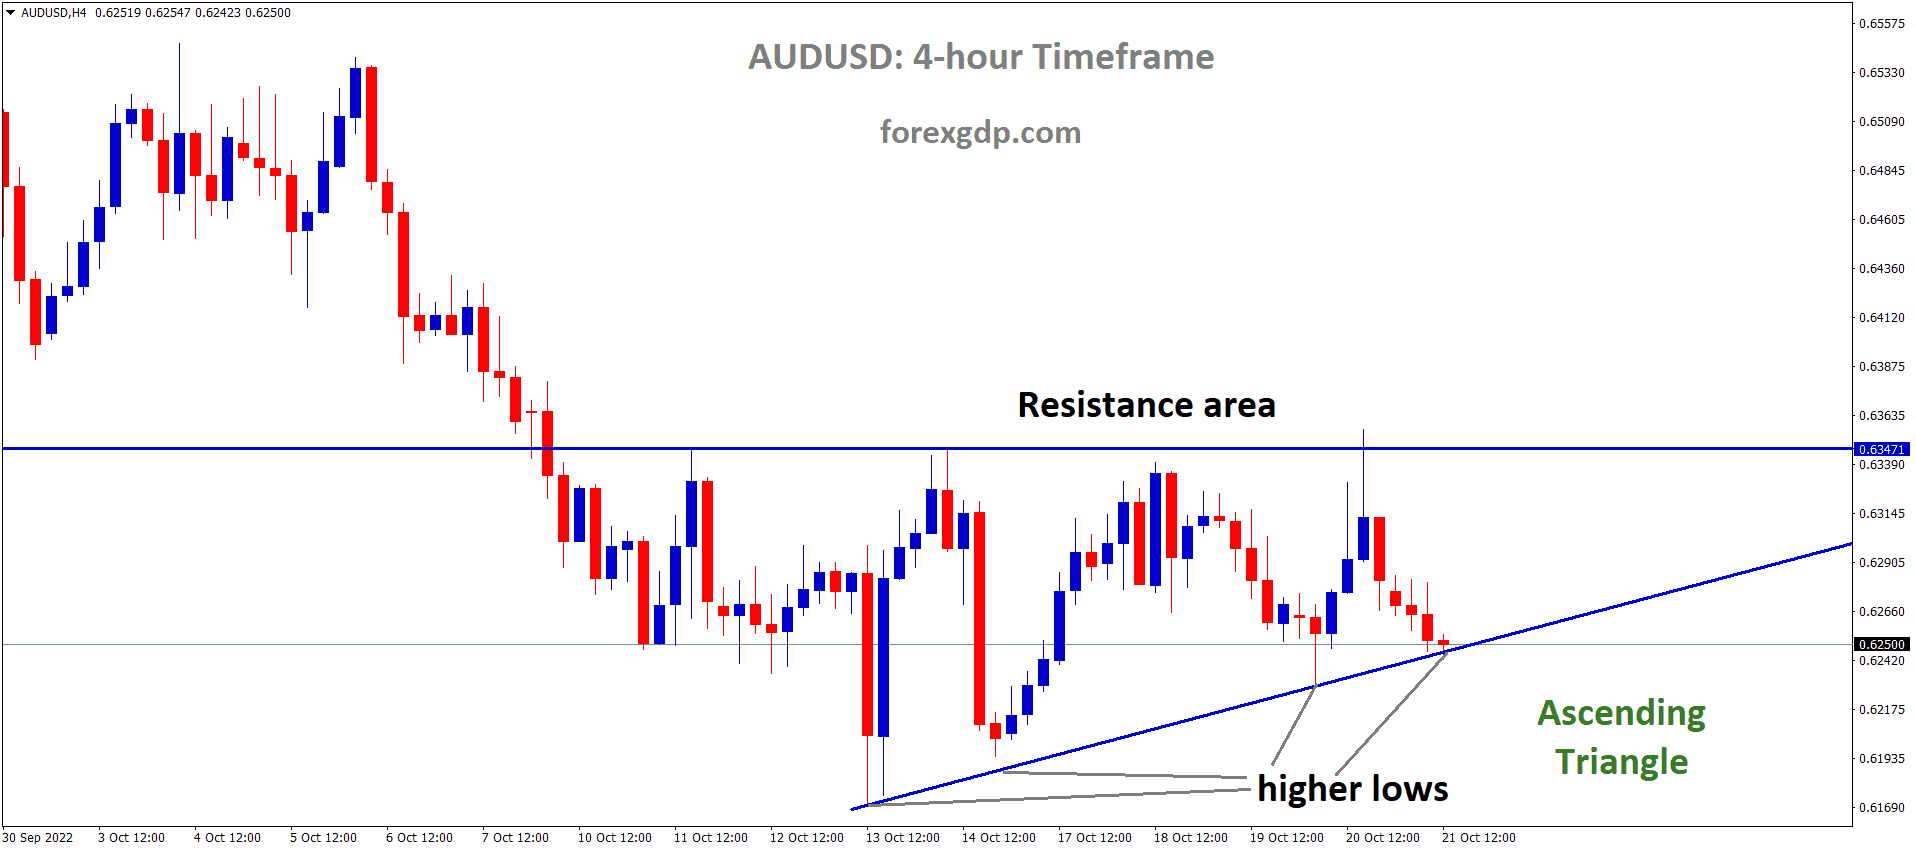 AUDUSD is moving in an Ascending triangle pattern and the market has reached the higher low area of the pattern